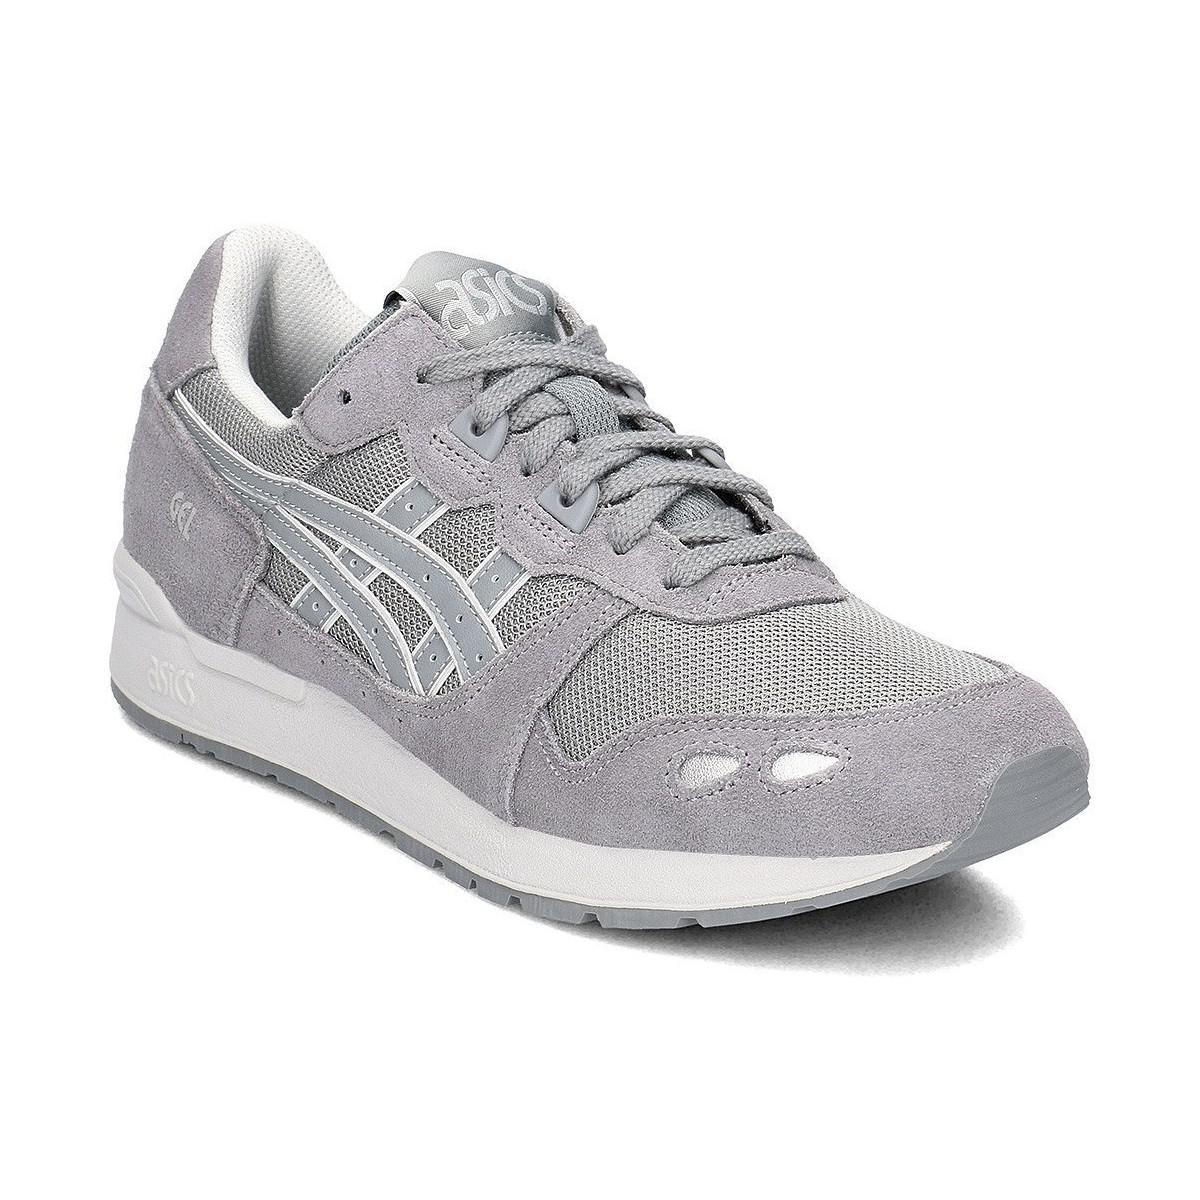 Asics Asics Tiger Men's Shoes (trainers) In Grey in Grey for Men - Lyst